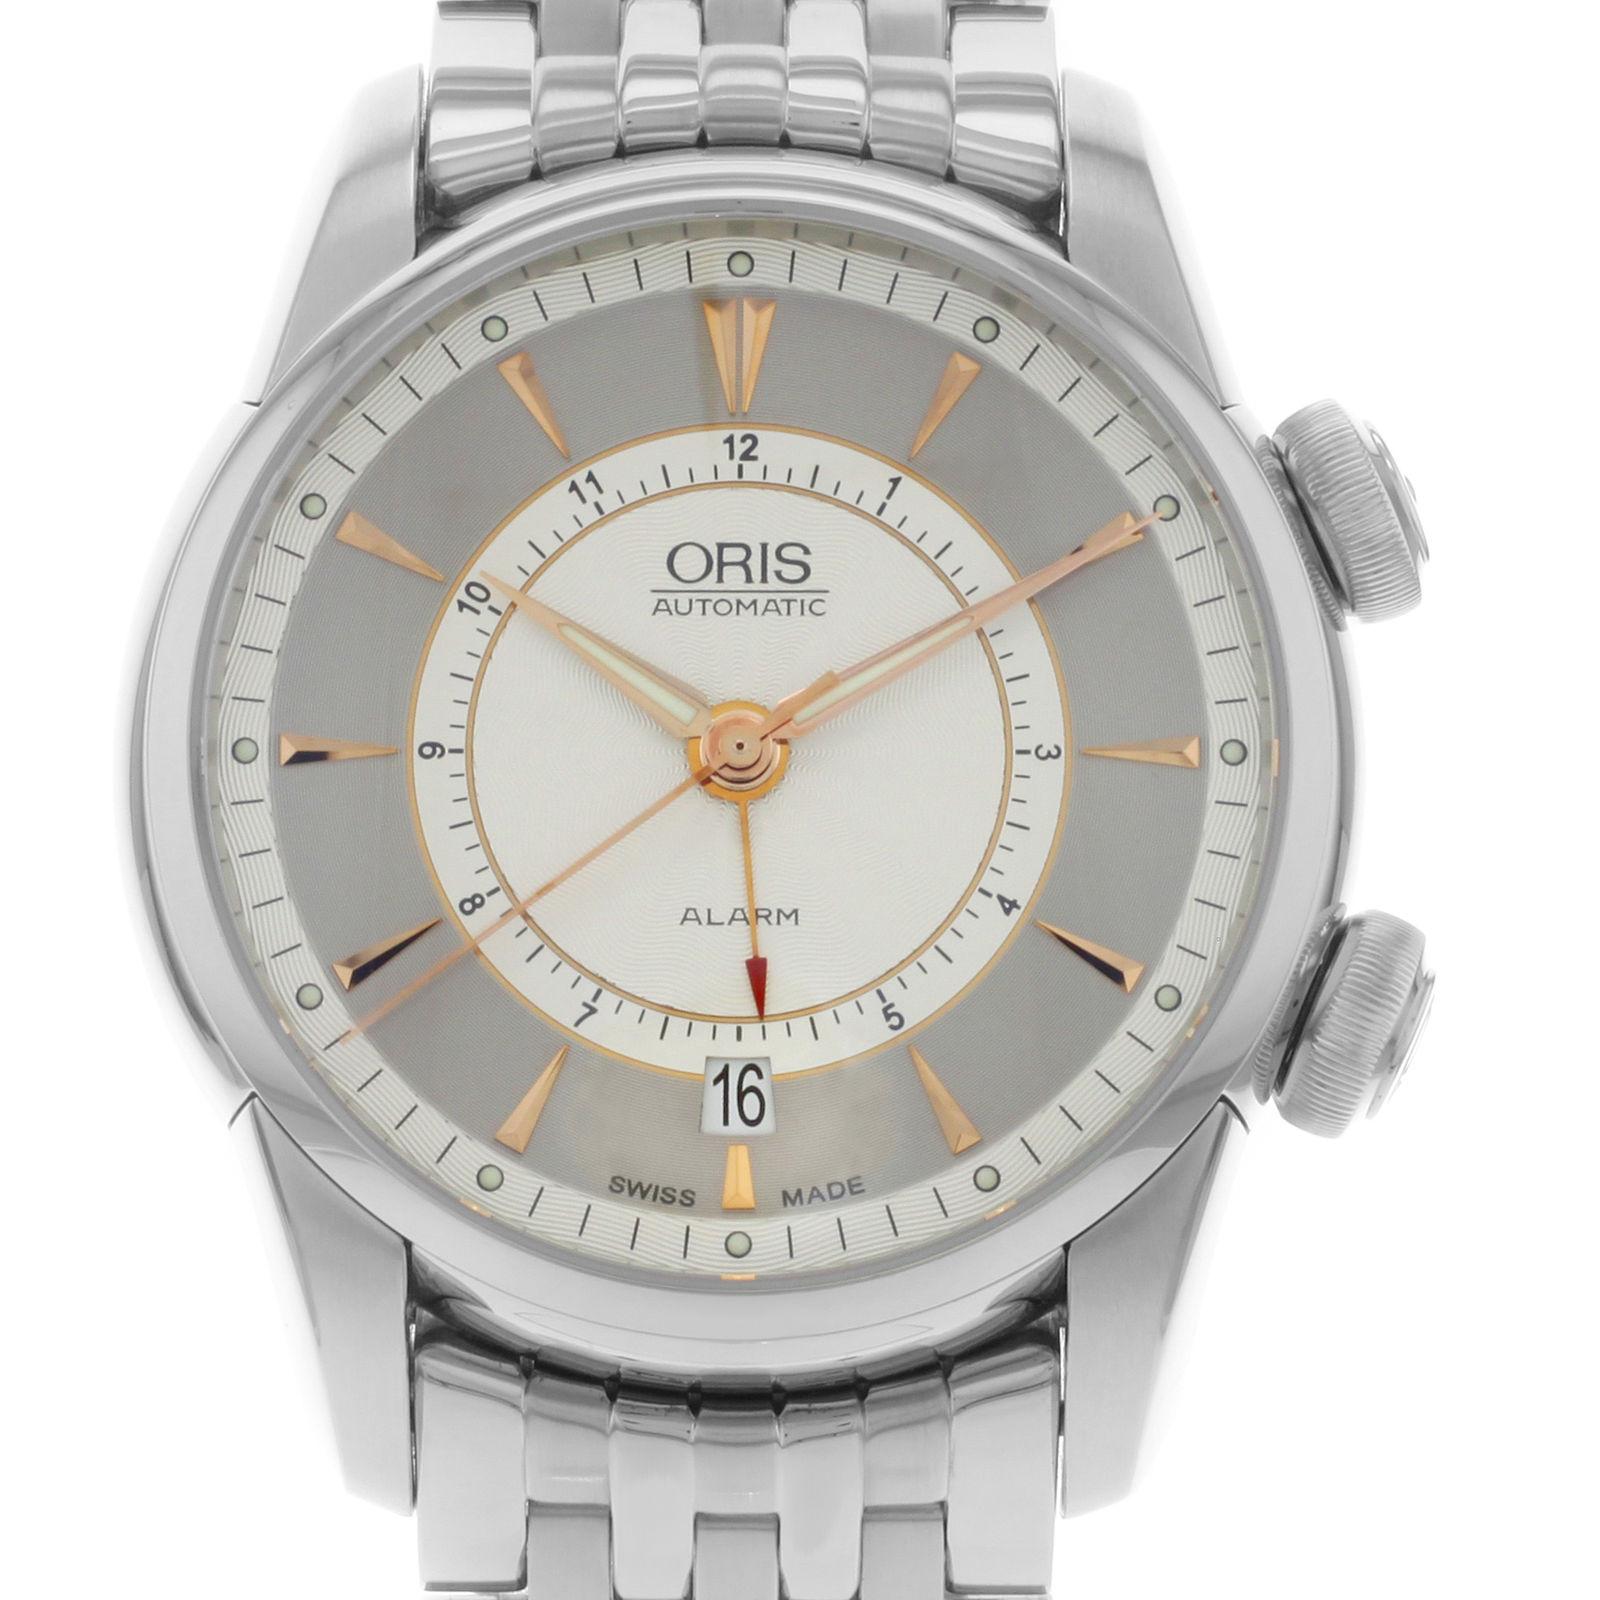 New. This watch comes with an original box and no original papers are supplied.

Details:
Brand	Oris
Series	Artelier
Model Number	01 908 7607 4051-Set-MB
Box	Yes
Papers	No
Movement	Automatic Self Wind
Gender	Mens
Case Material	Stainless Steel
Case